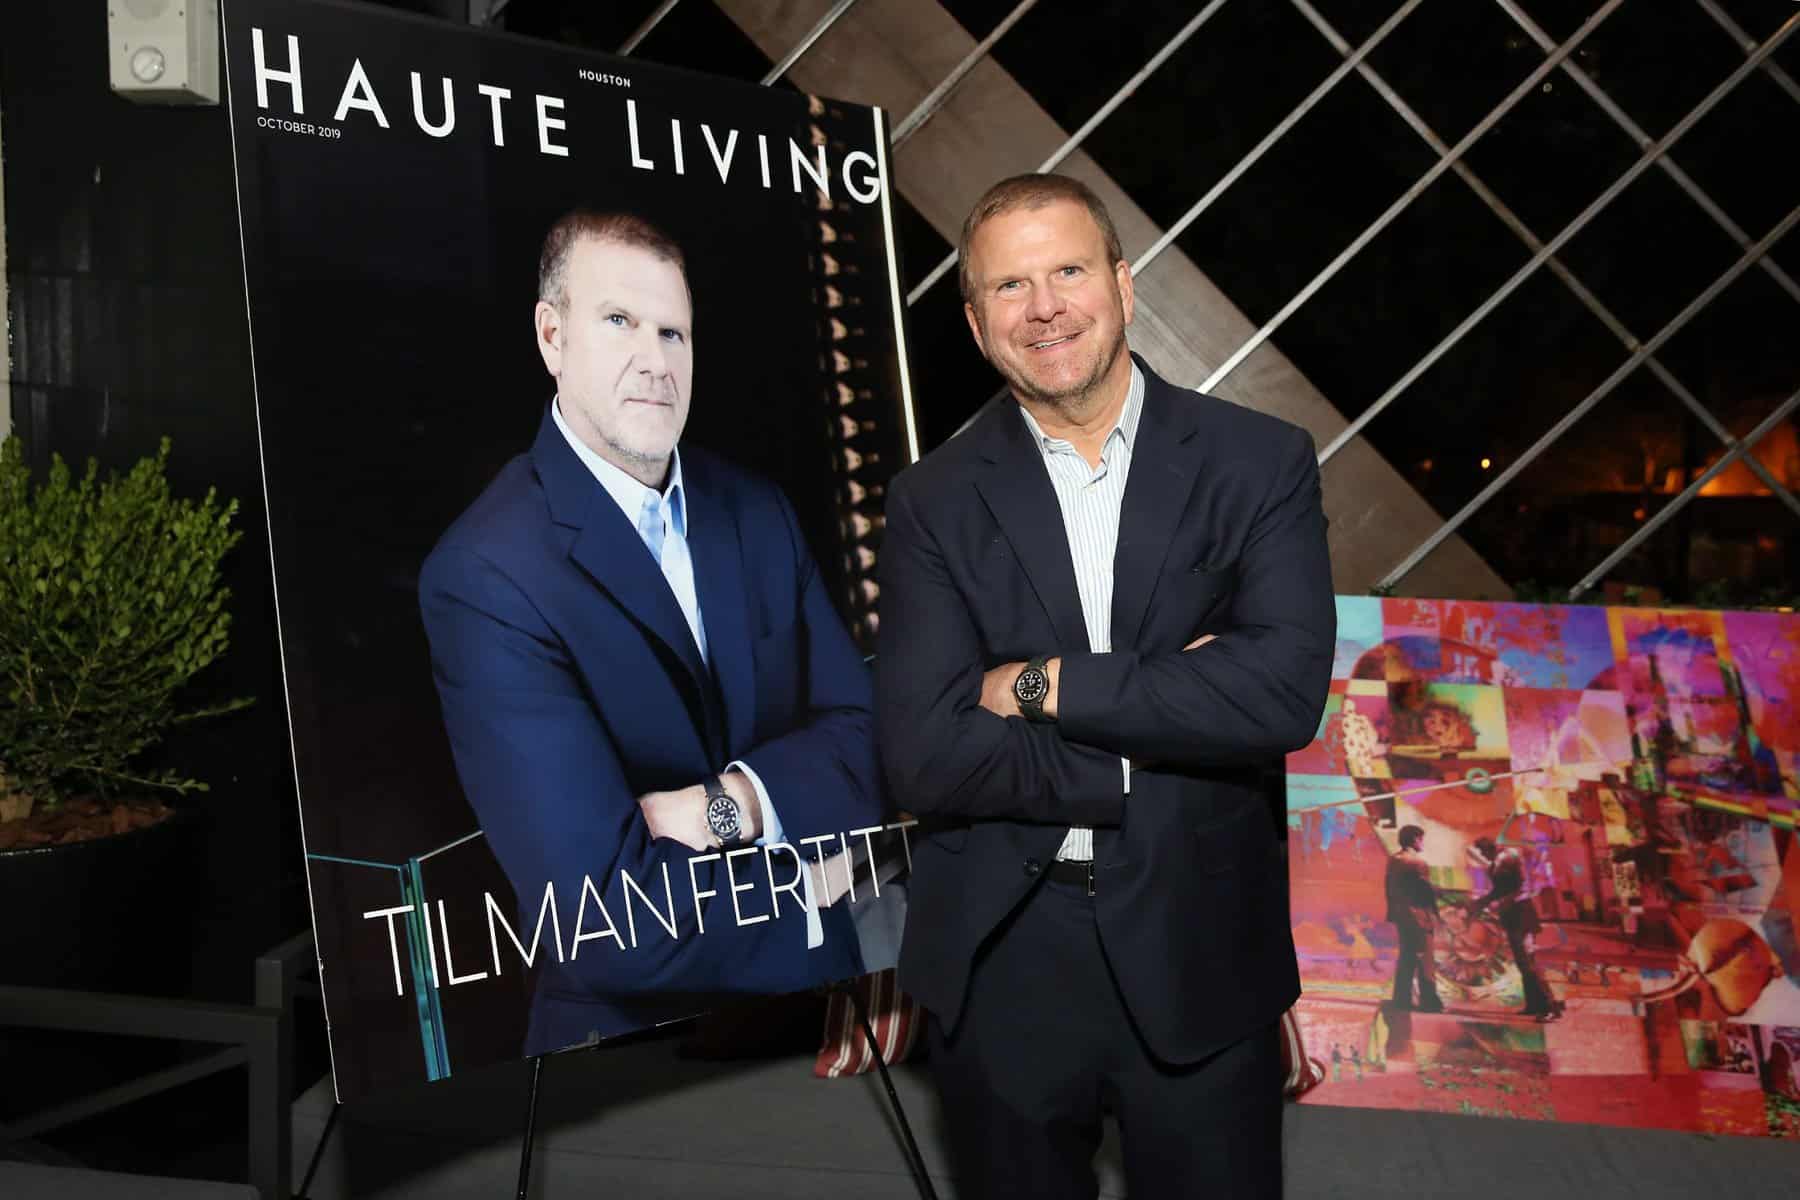 haute-living-and-louis-xiii-celebrate-tilman-fertitta-cover-and-book-release